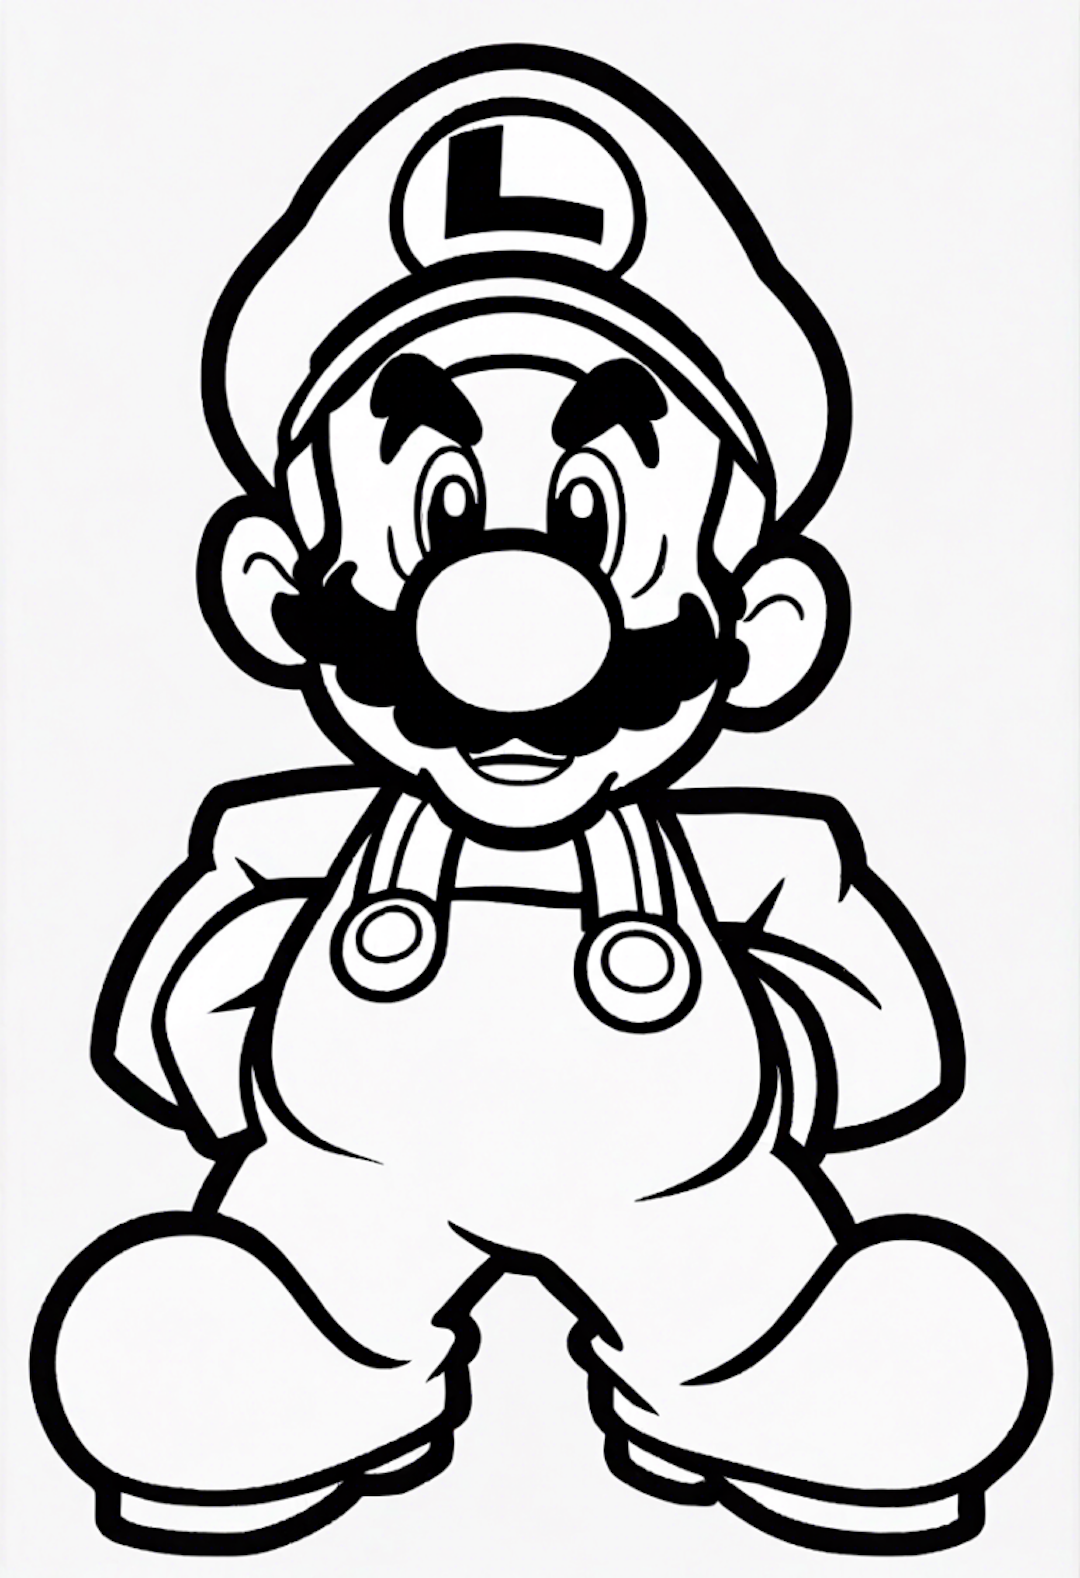 Luigi the Plumber – Coloring Fun! coloring pages